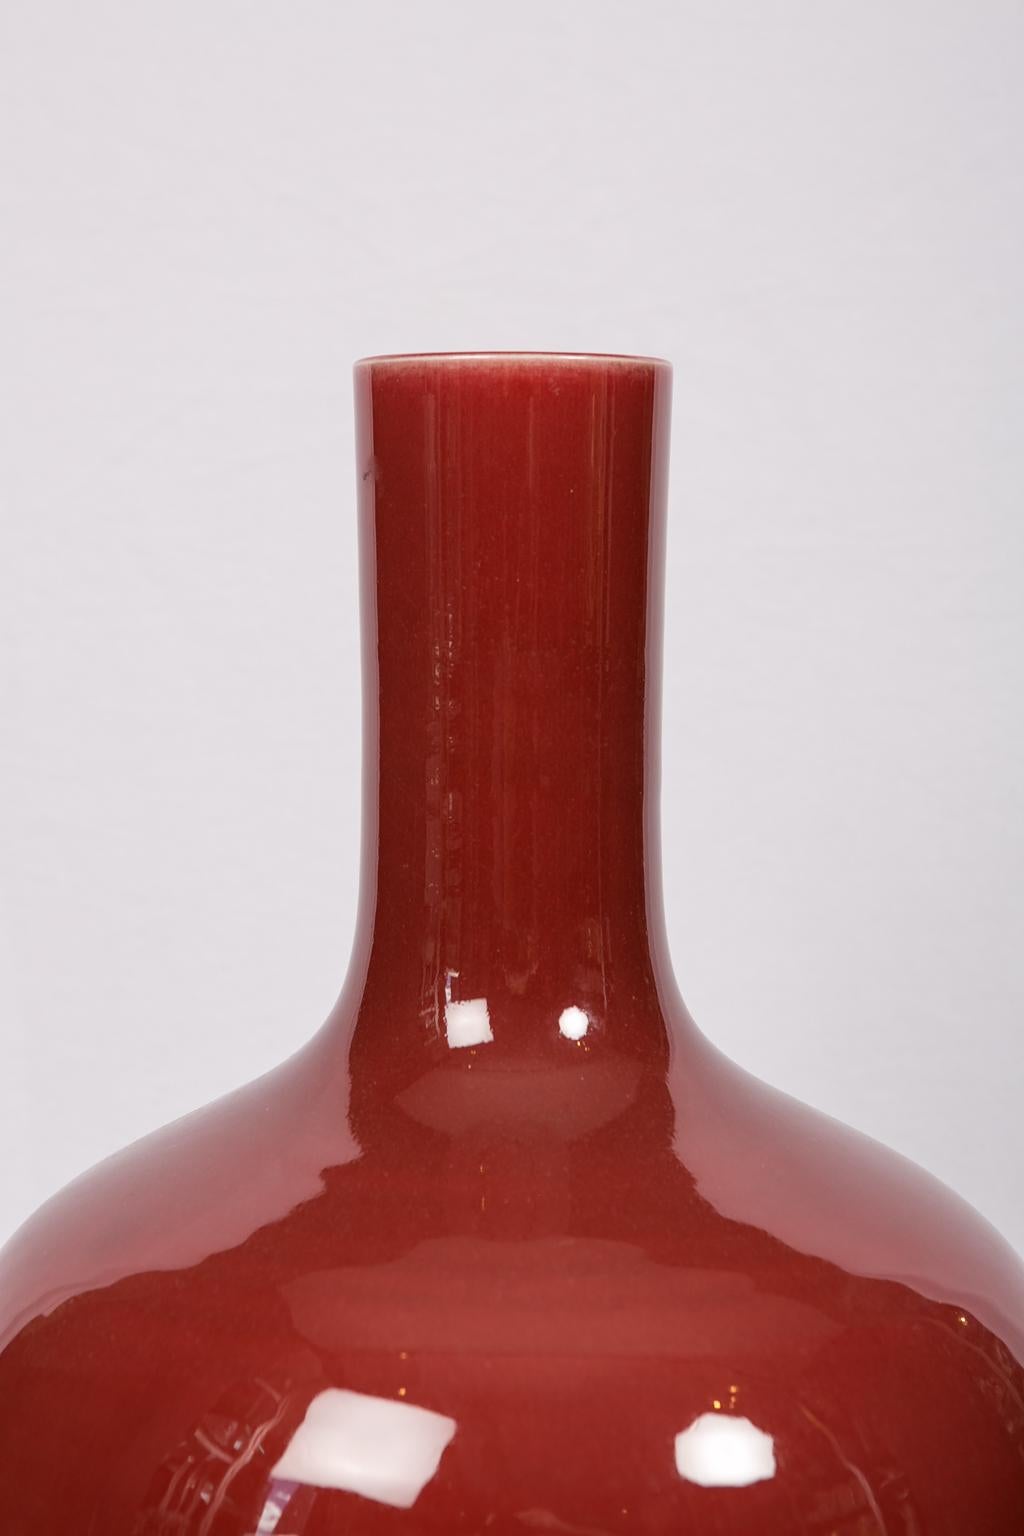 We are pleased to offer this large Chinese crimson long-neck vase dating to early 19th century. Evenly covered in a rich, warm, deep red glaze, the vase has a bulbous body that is elegantly potted. The crimson glaze, or 